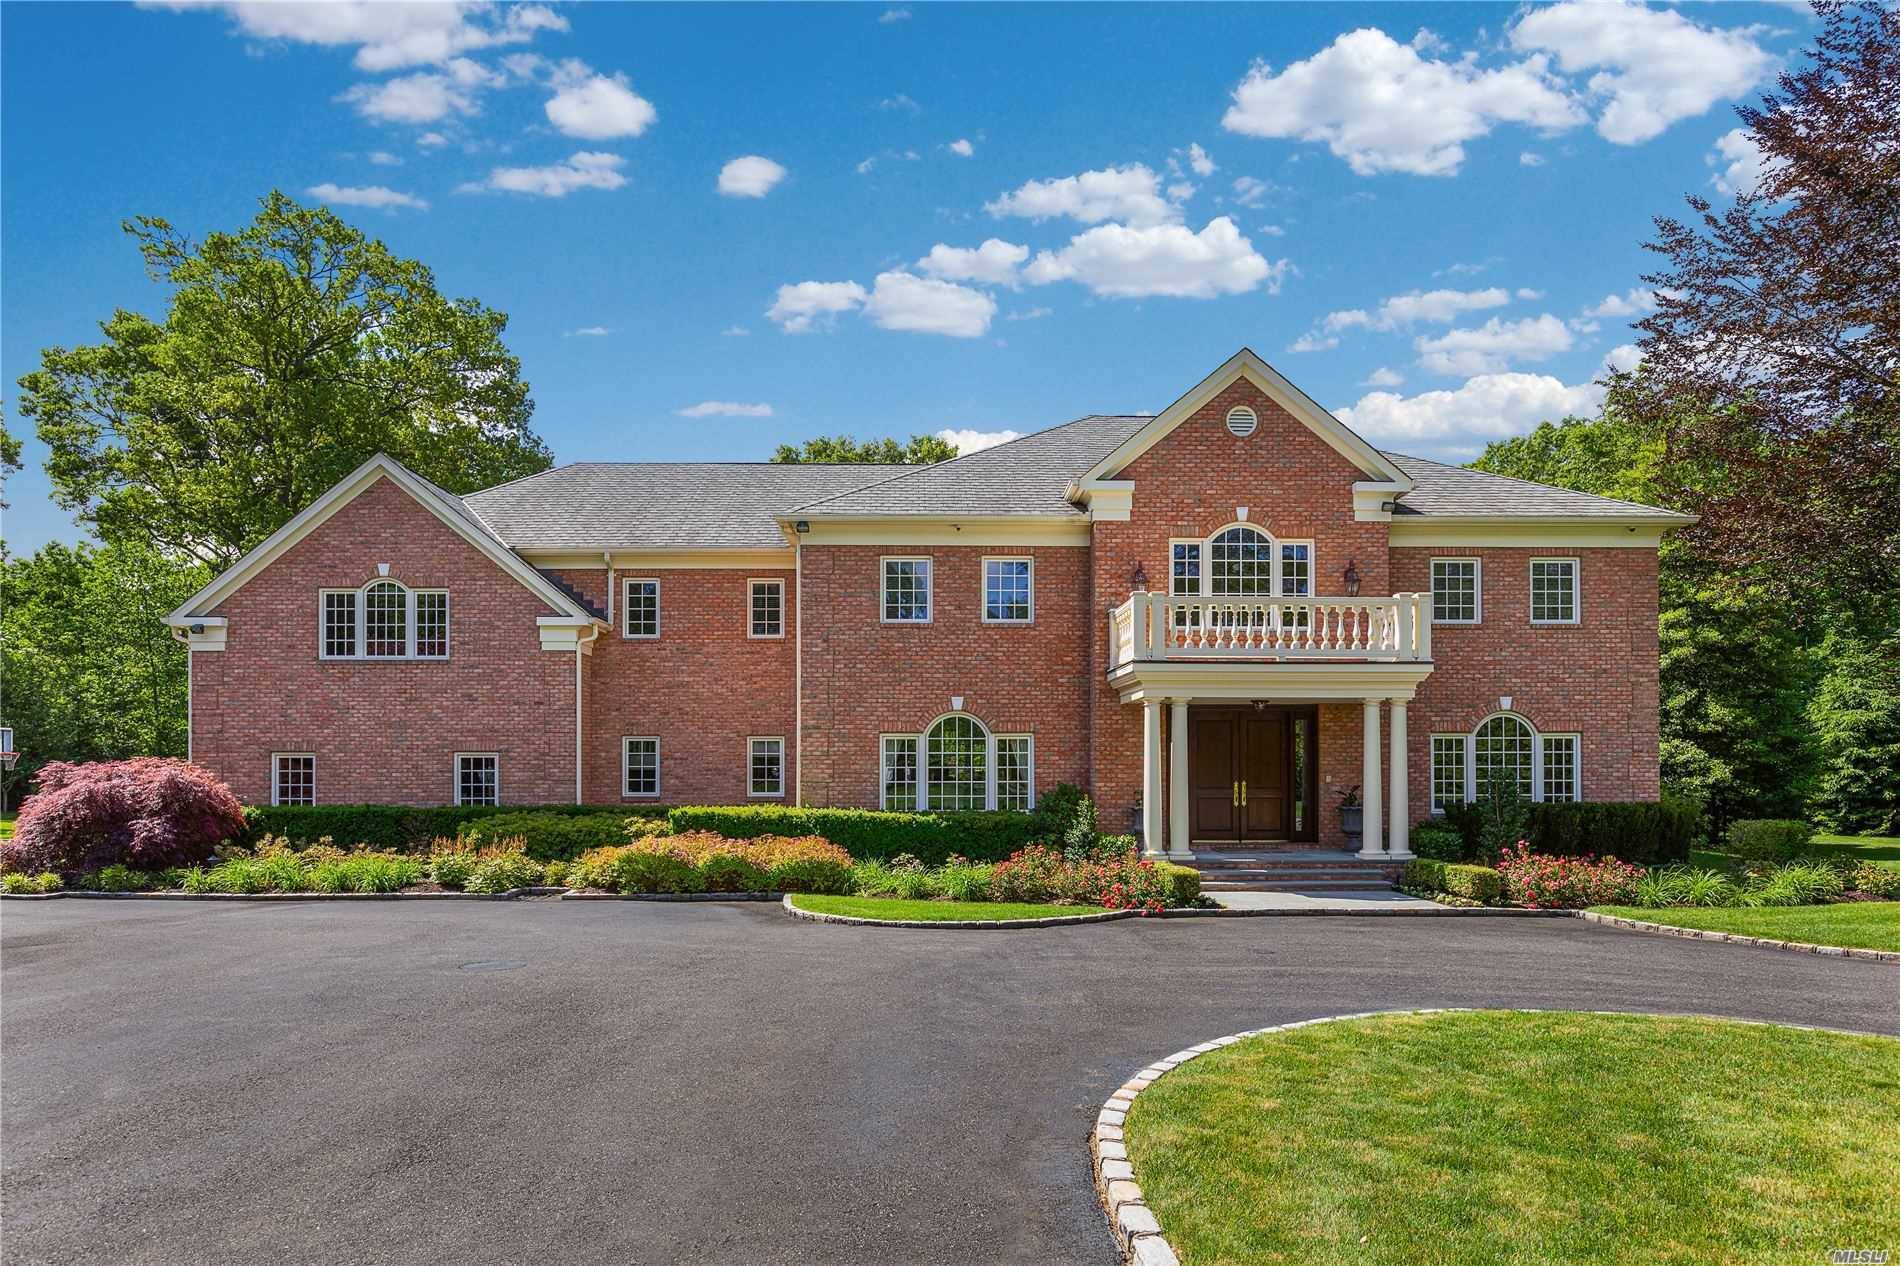 Exquisite 7200 Sqft Brick Center Hall Colonial On 2 Acres Meticulously Manicured Private Estate Property !